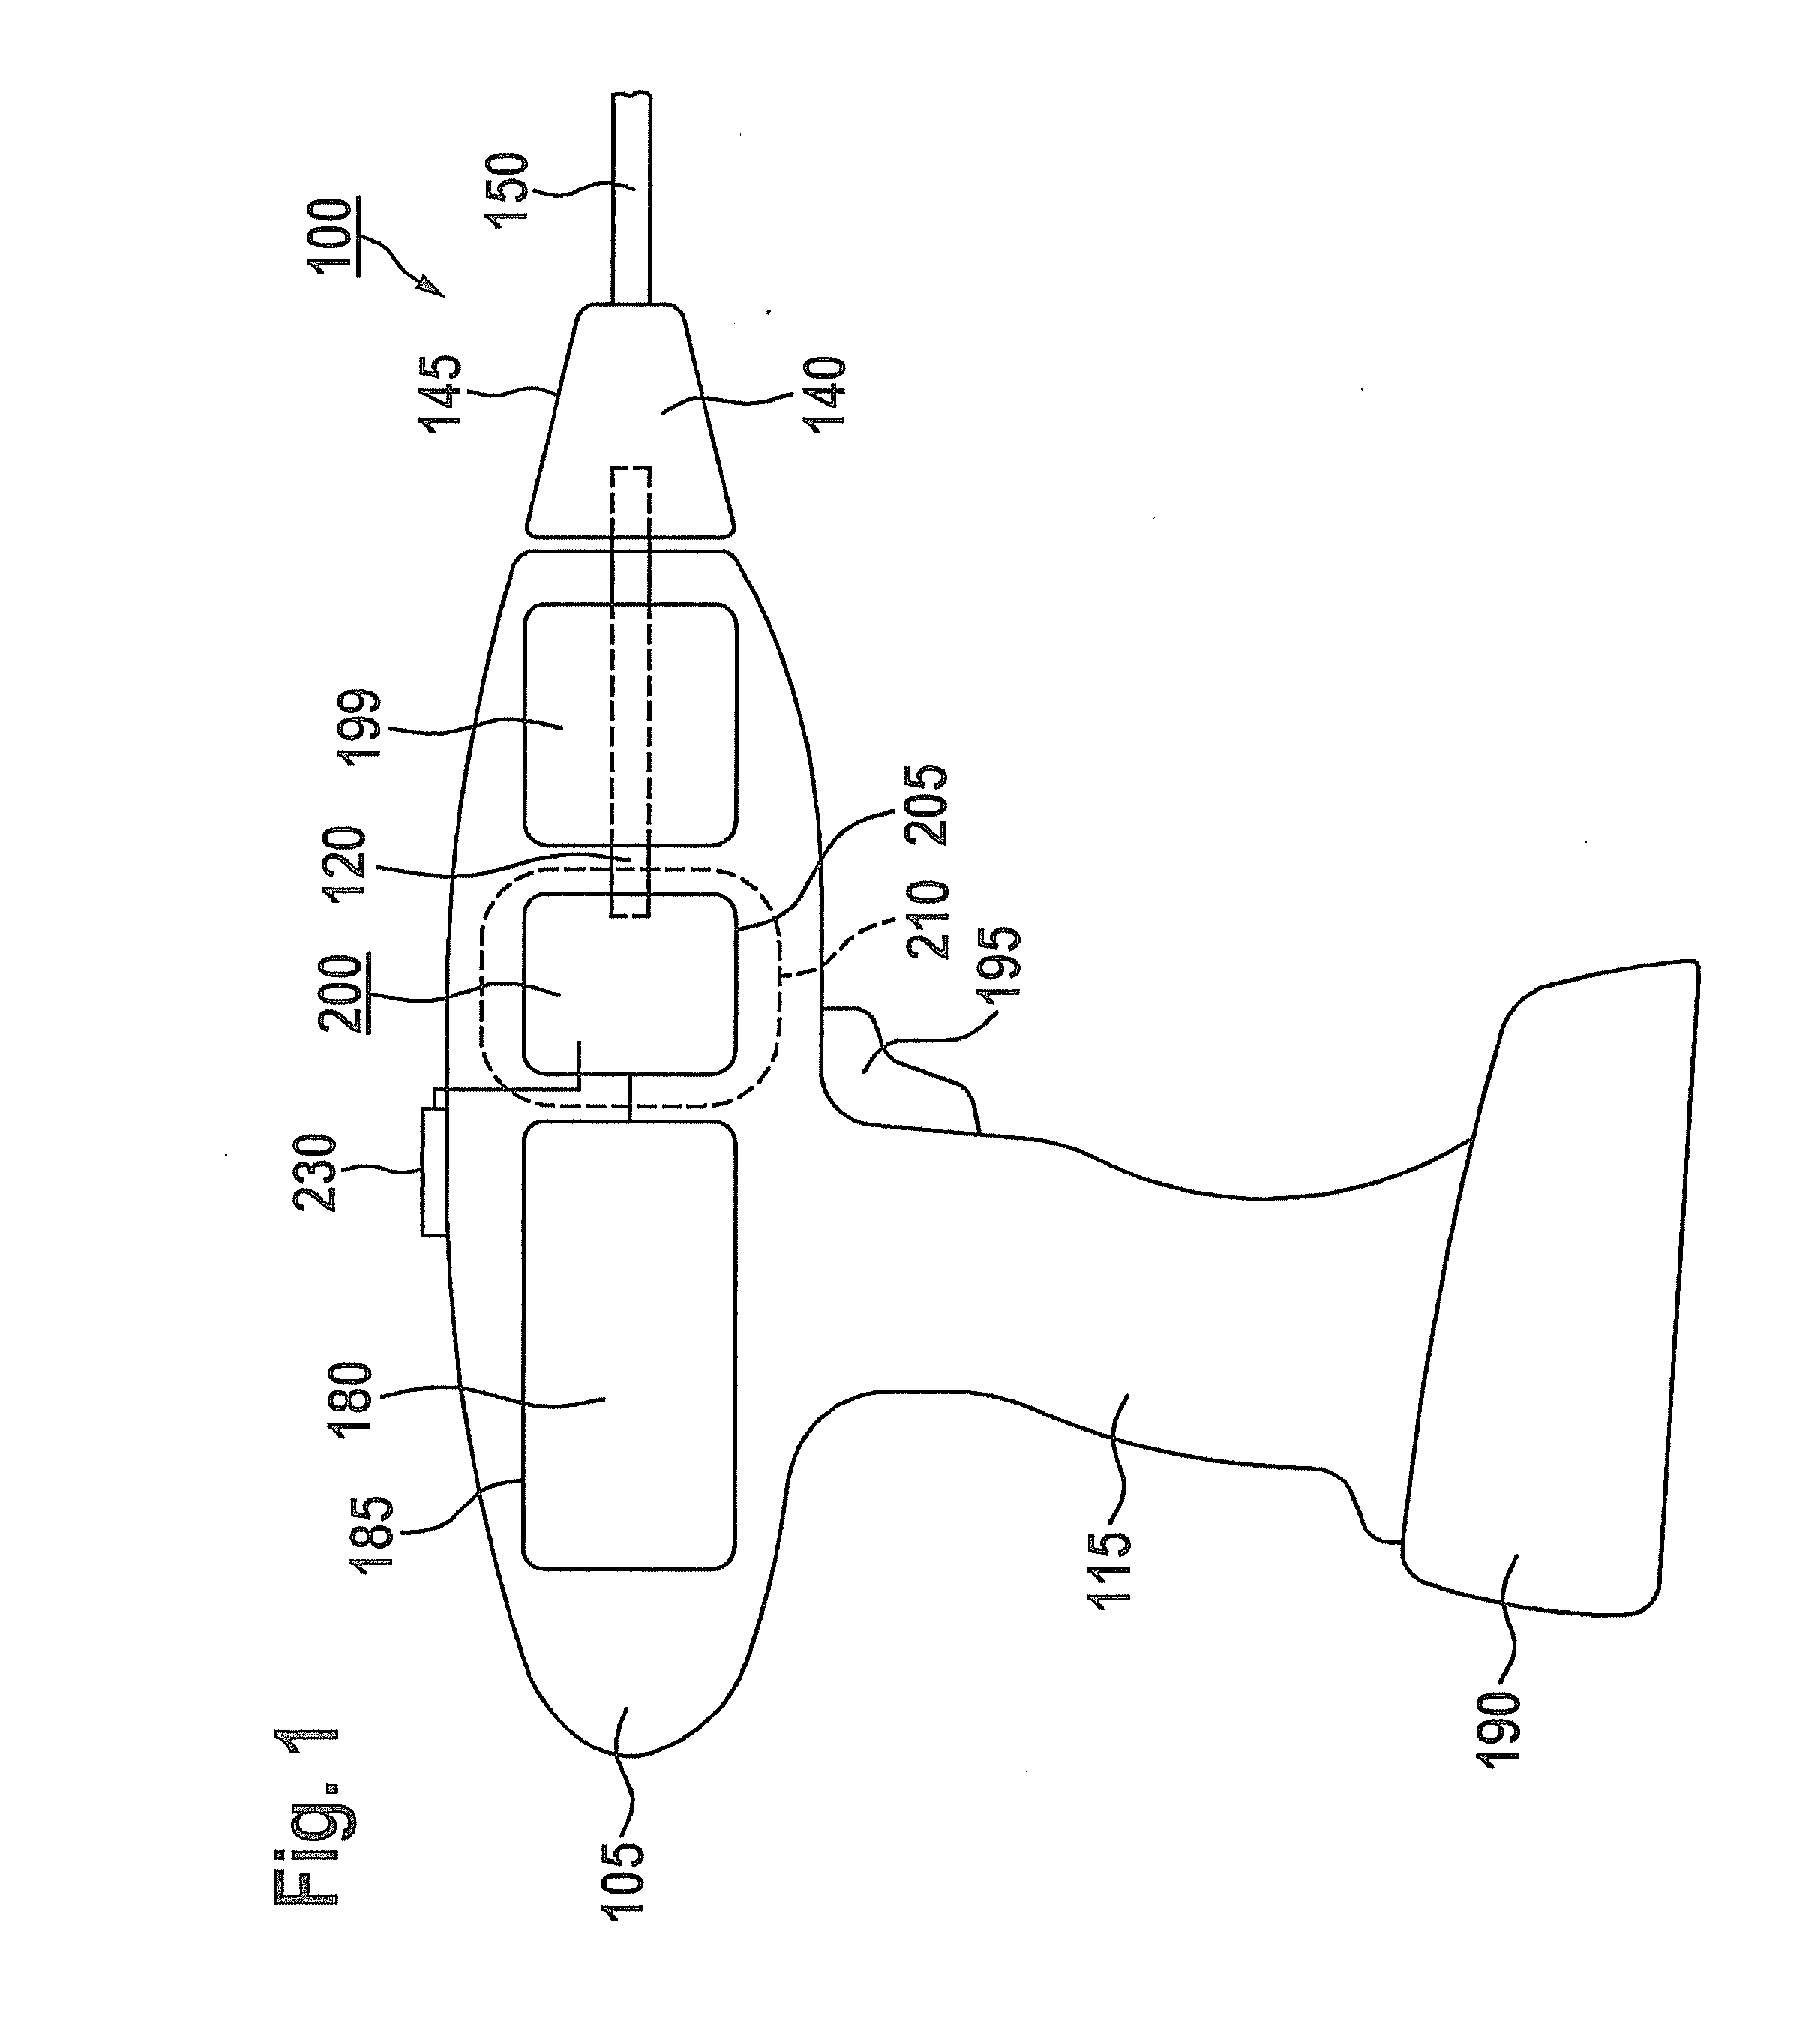 Hand-held power tool having a planetary gearbox